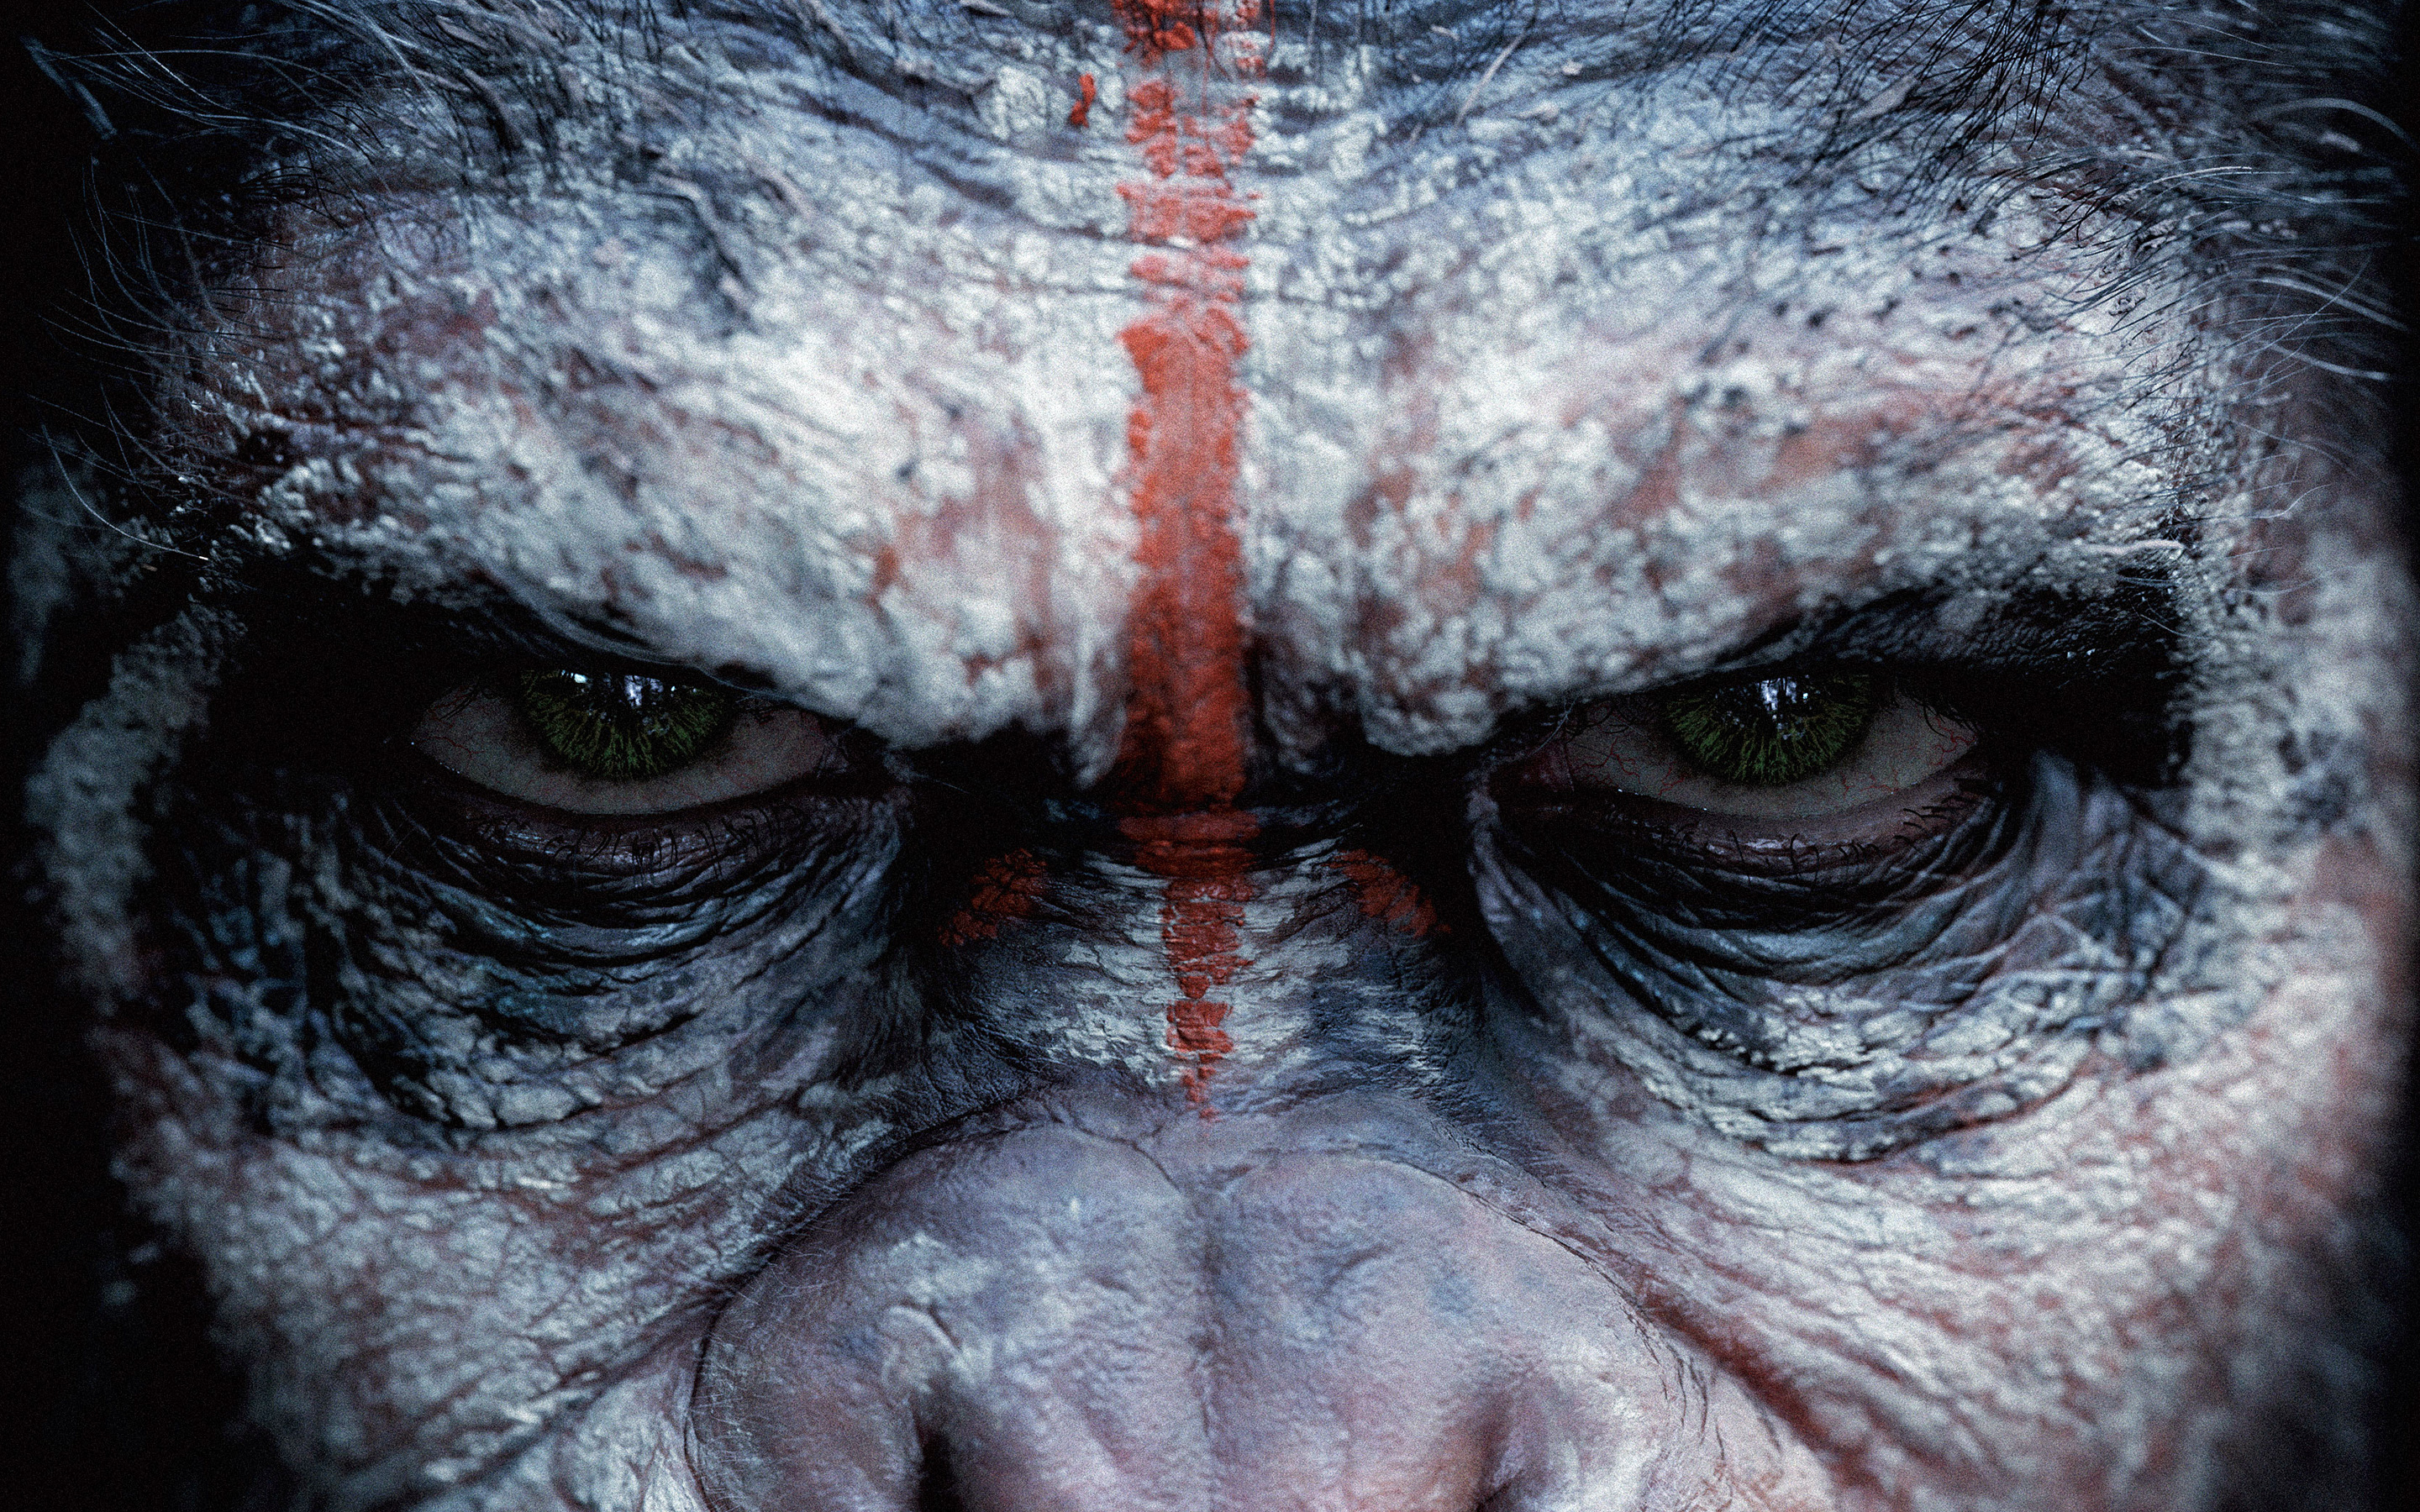 Podcast: Dawn of the Planet of the Apes, Top 3 CGI Characters – Episode 73